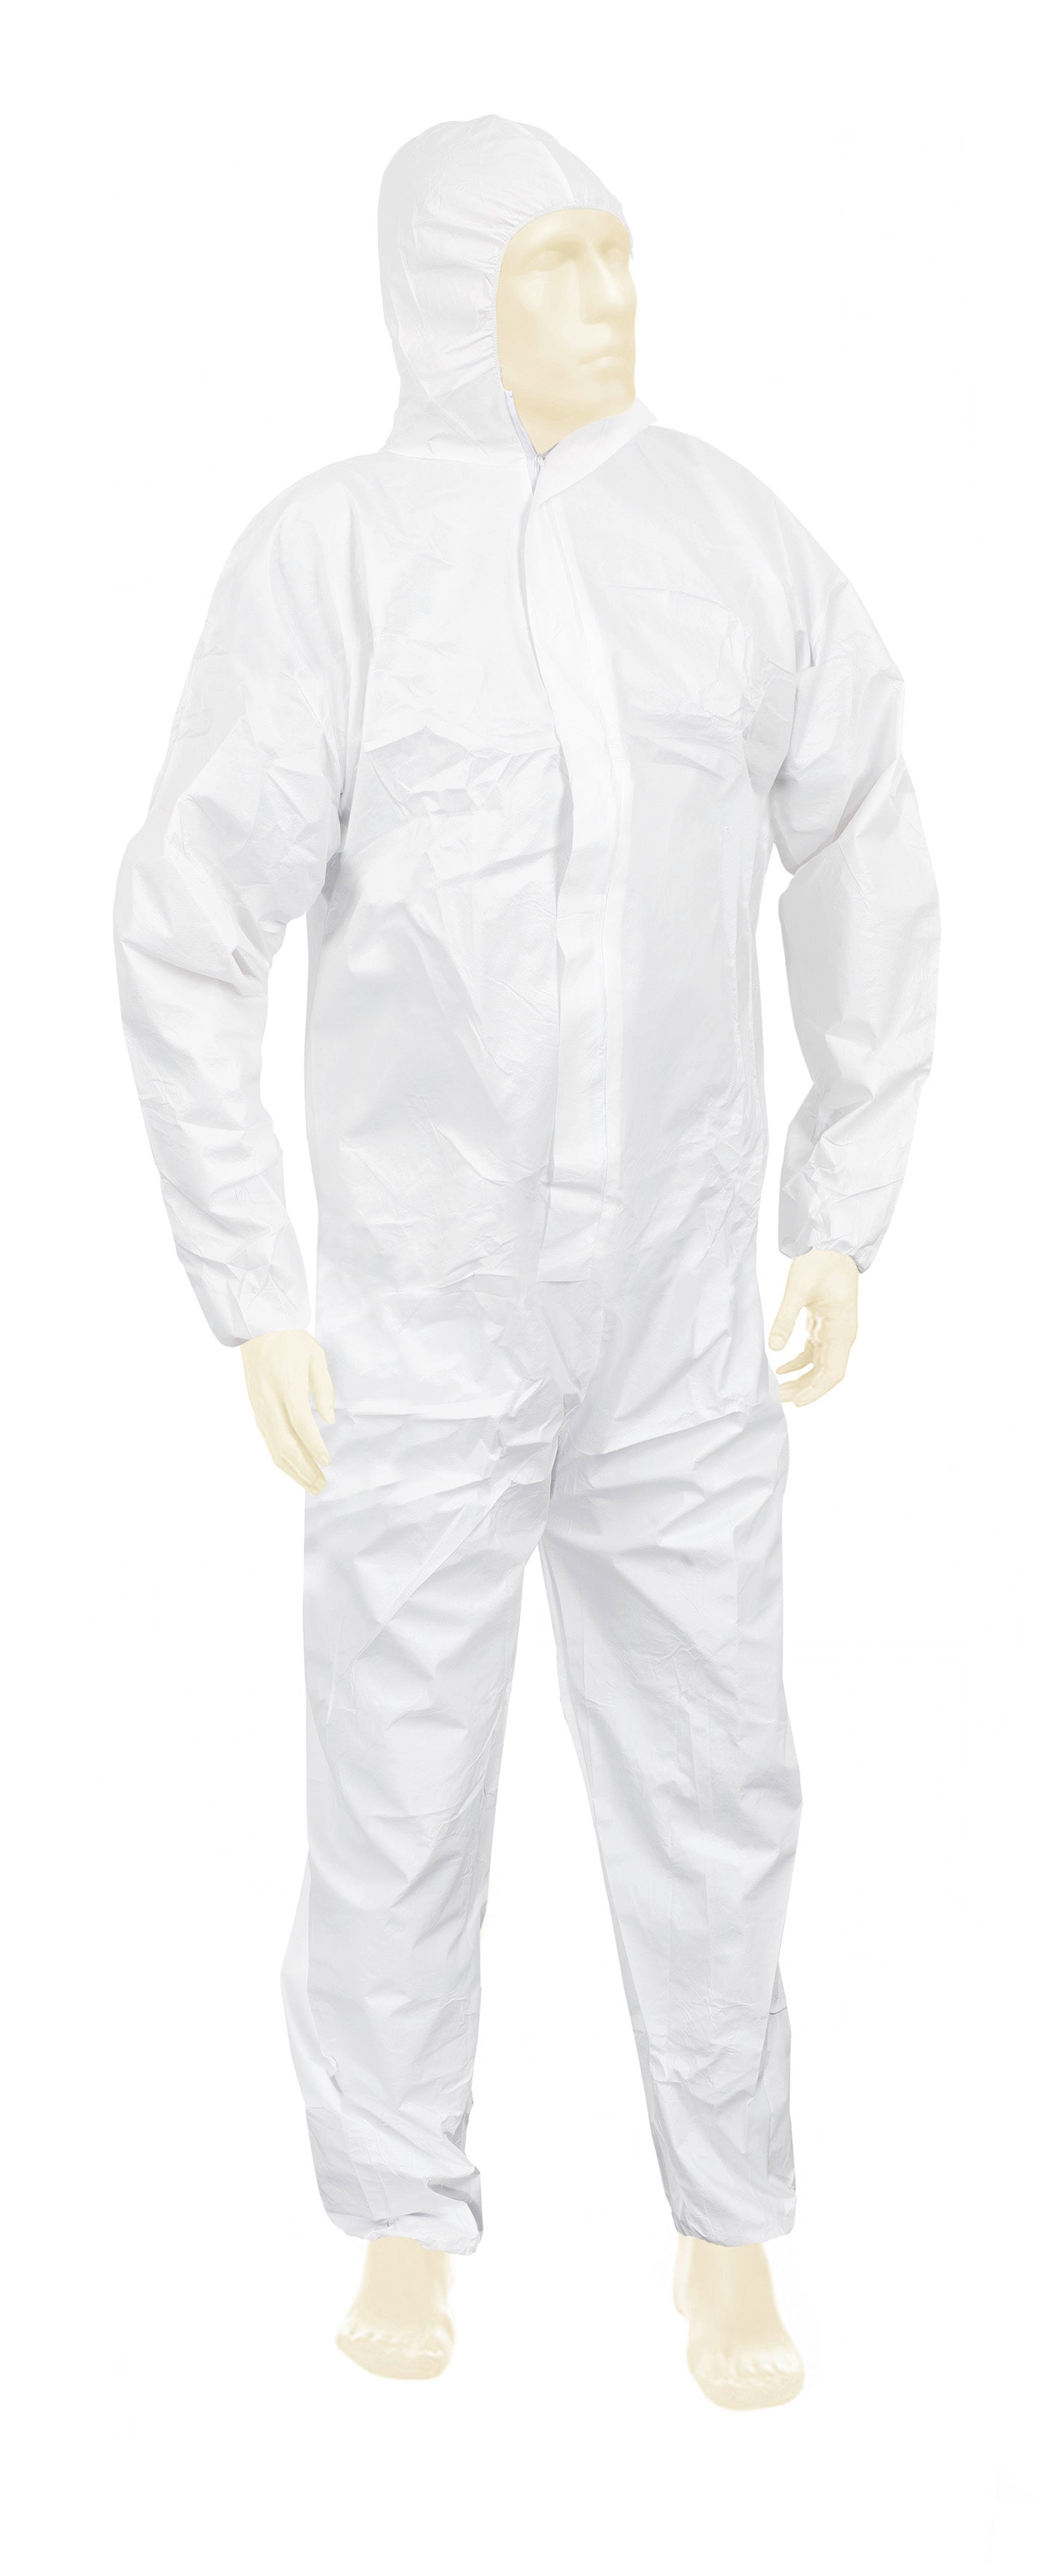 Protective suit white